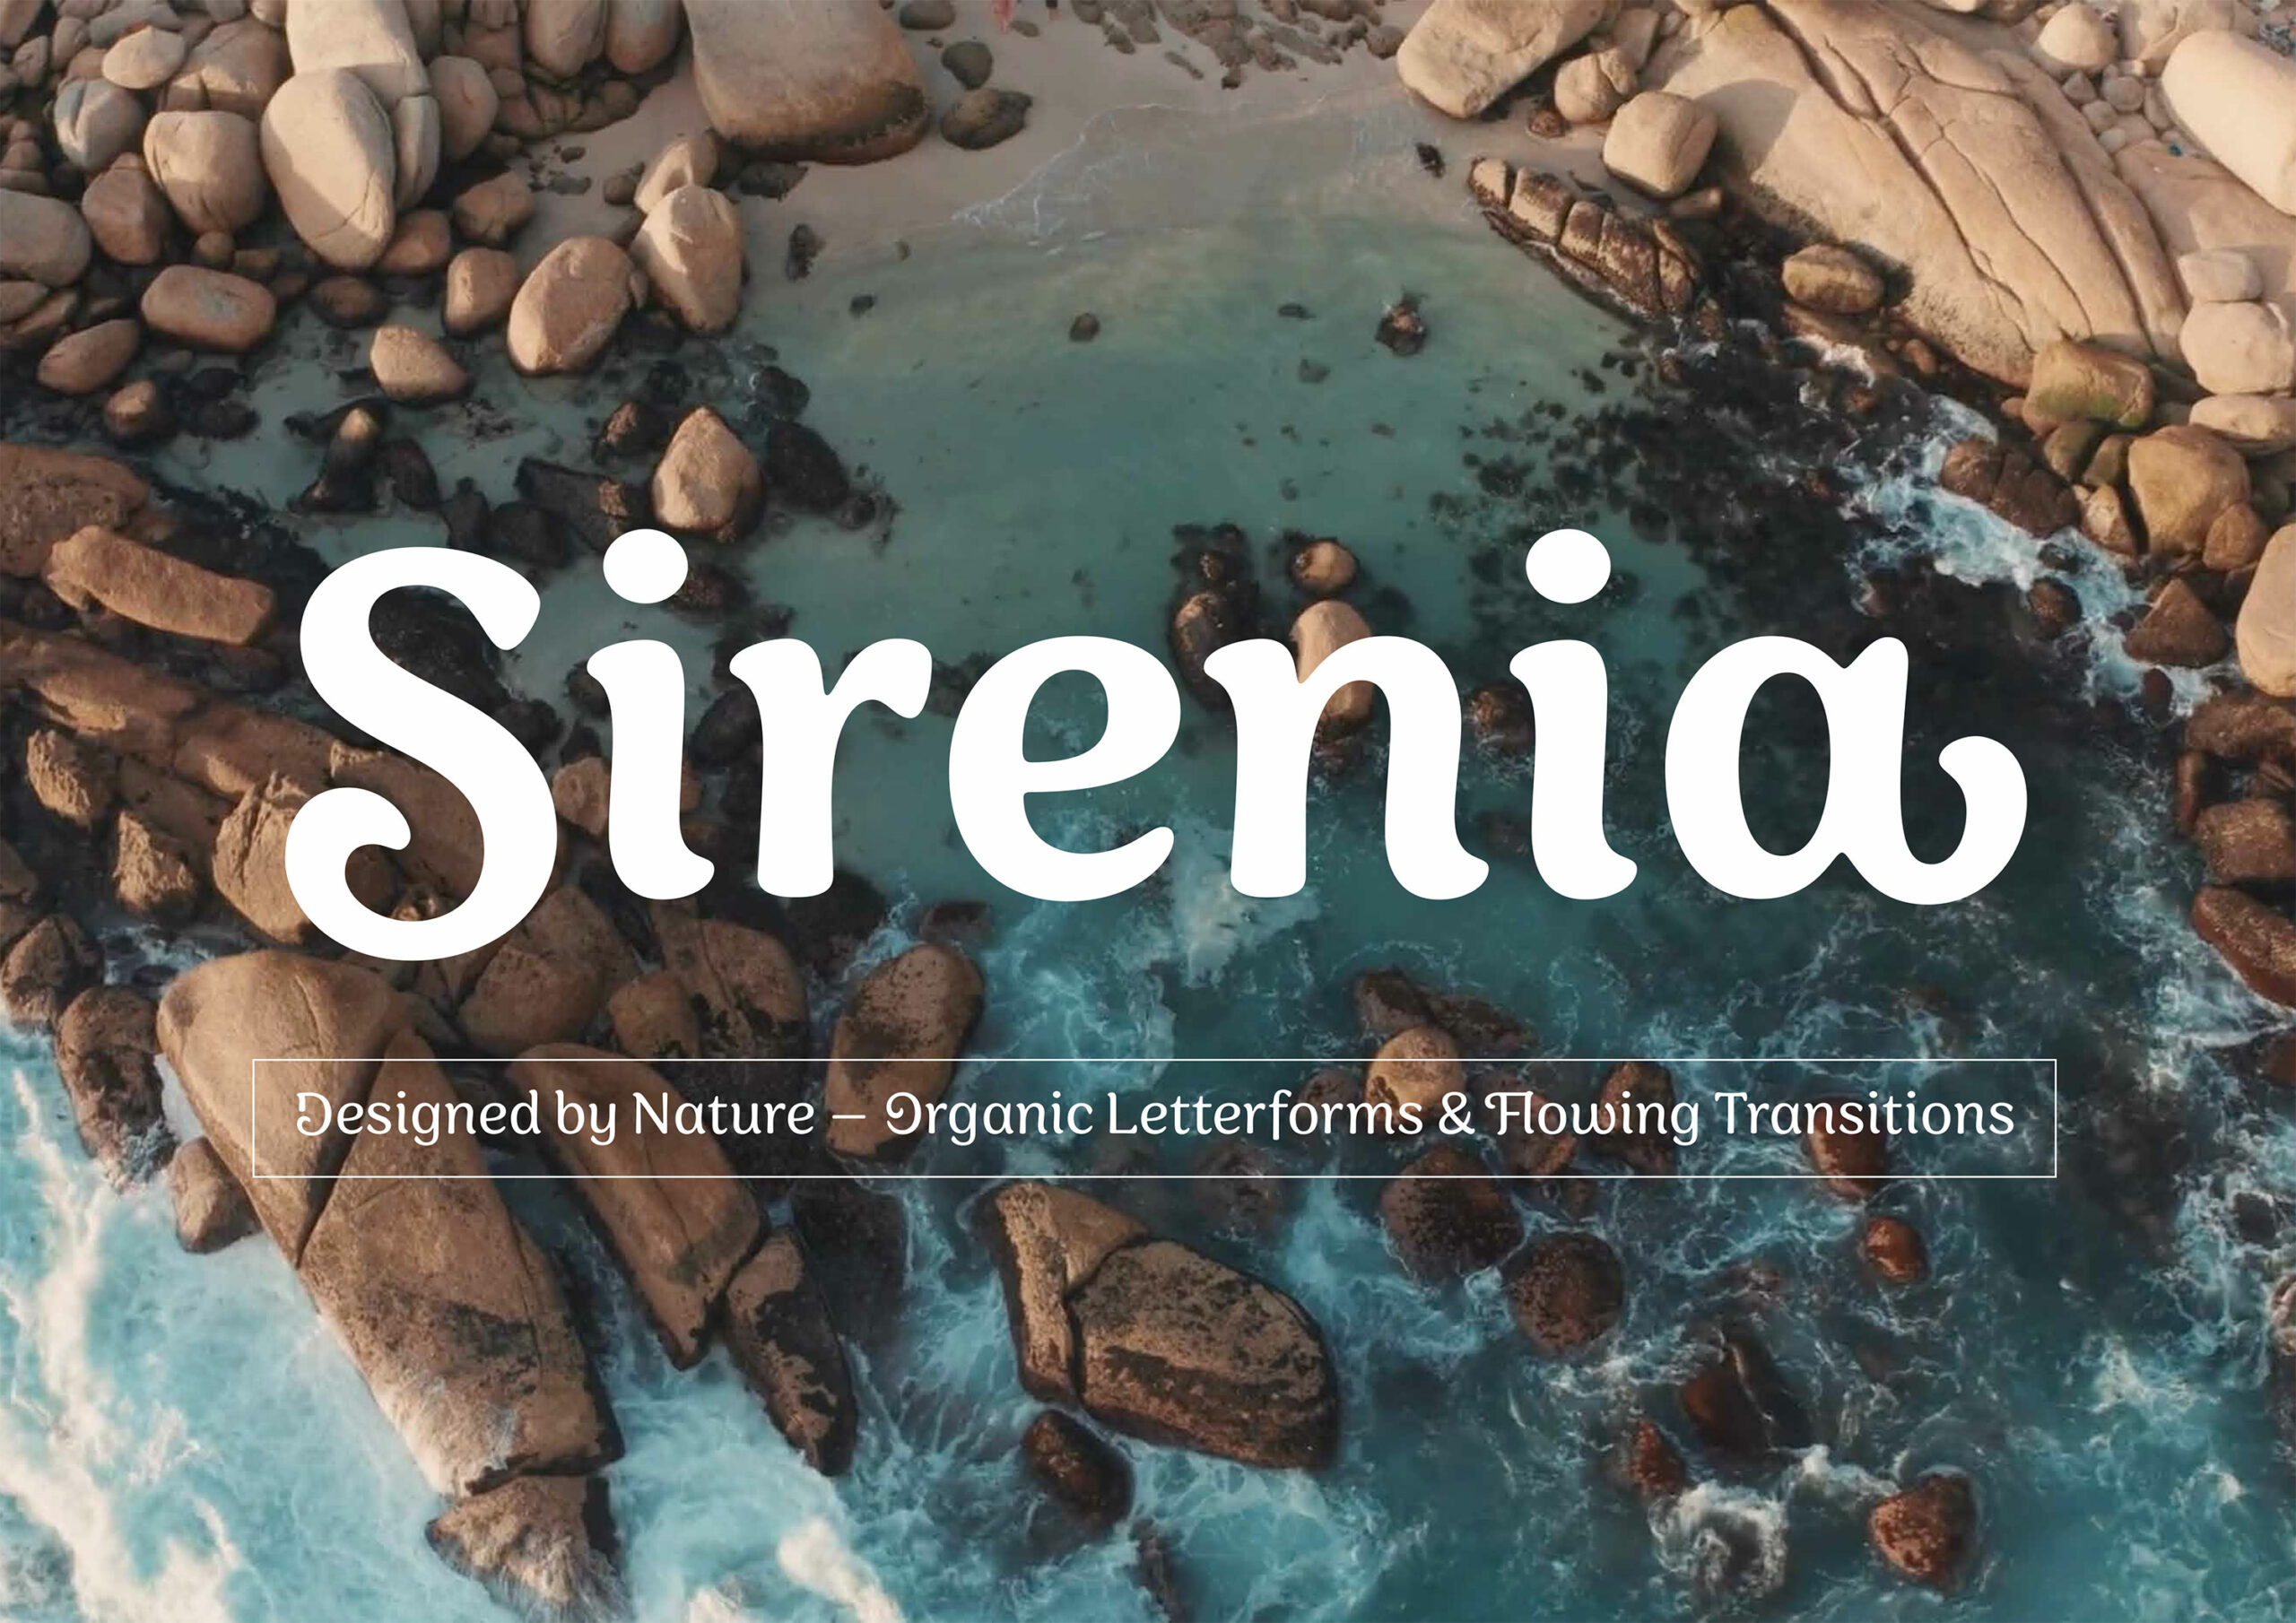 Sirenia Font – Designed by Nature, Quelle: Floodfonts, Foto(c)TarynElliott